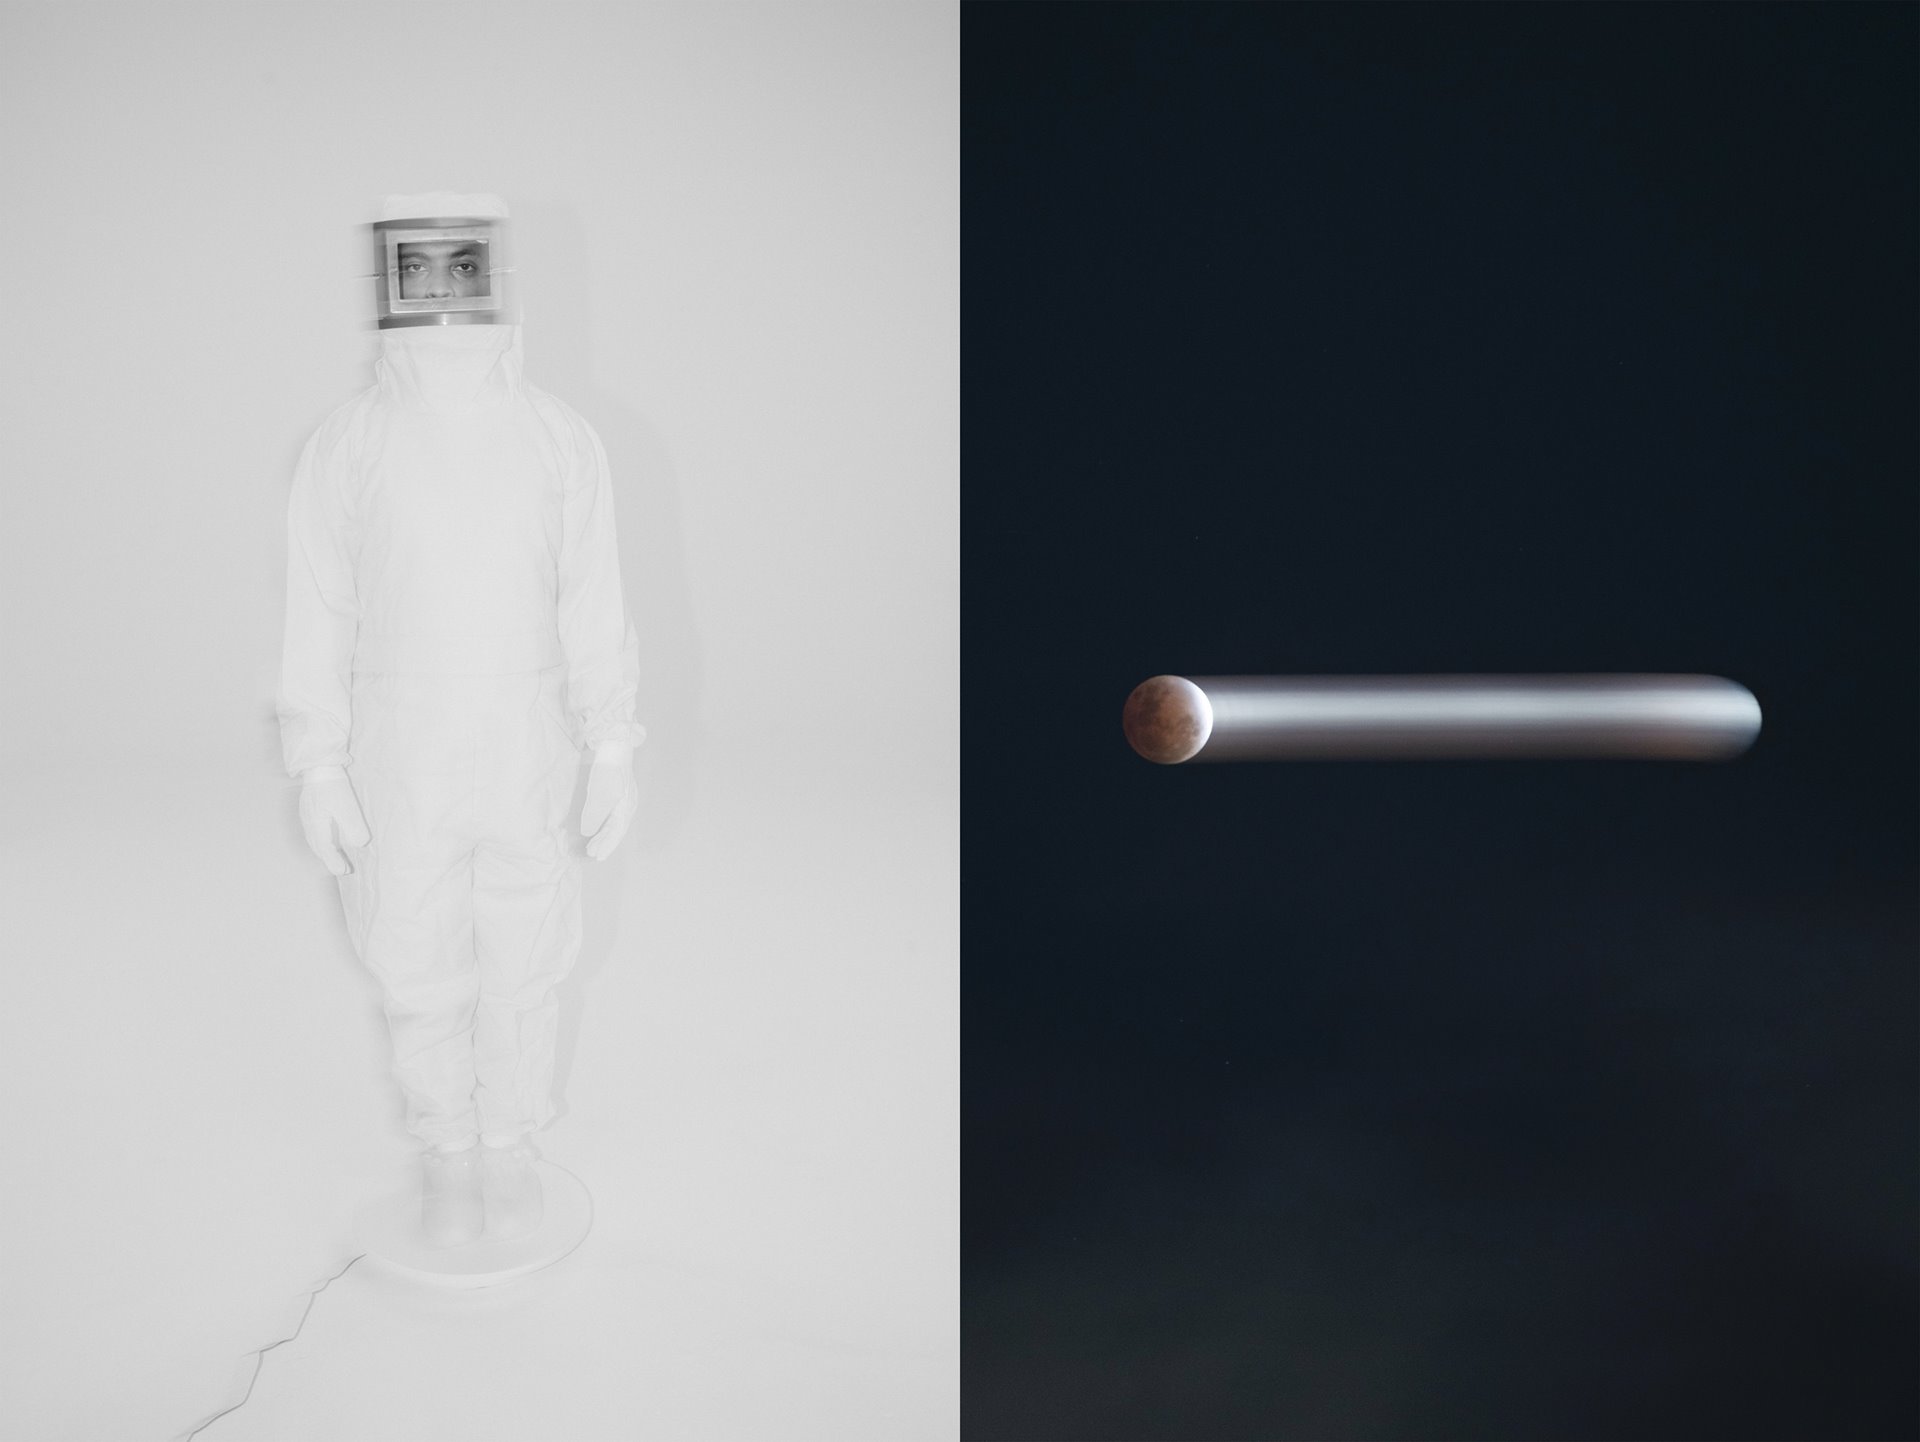 (Left) Isaac Charles Anderson during his fitting in Brooklyn, New York, United States for the space suit he will wear on the moon as an astronaut for the fictional Gay Space Agency. (Right) Long exposure of a lunar eclipse over Brooklyn, New York.&nbsp;